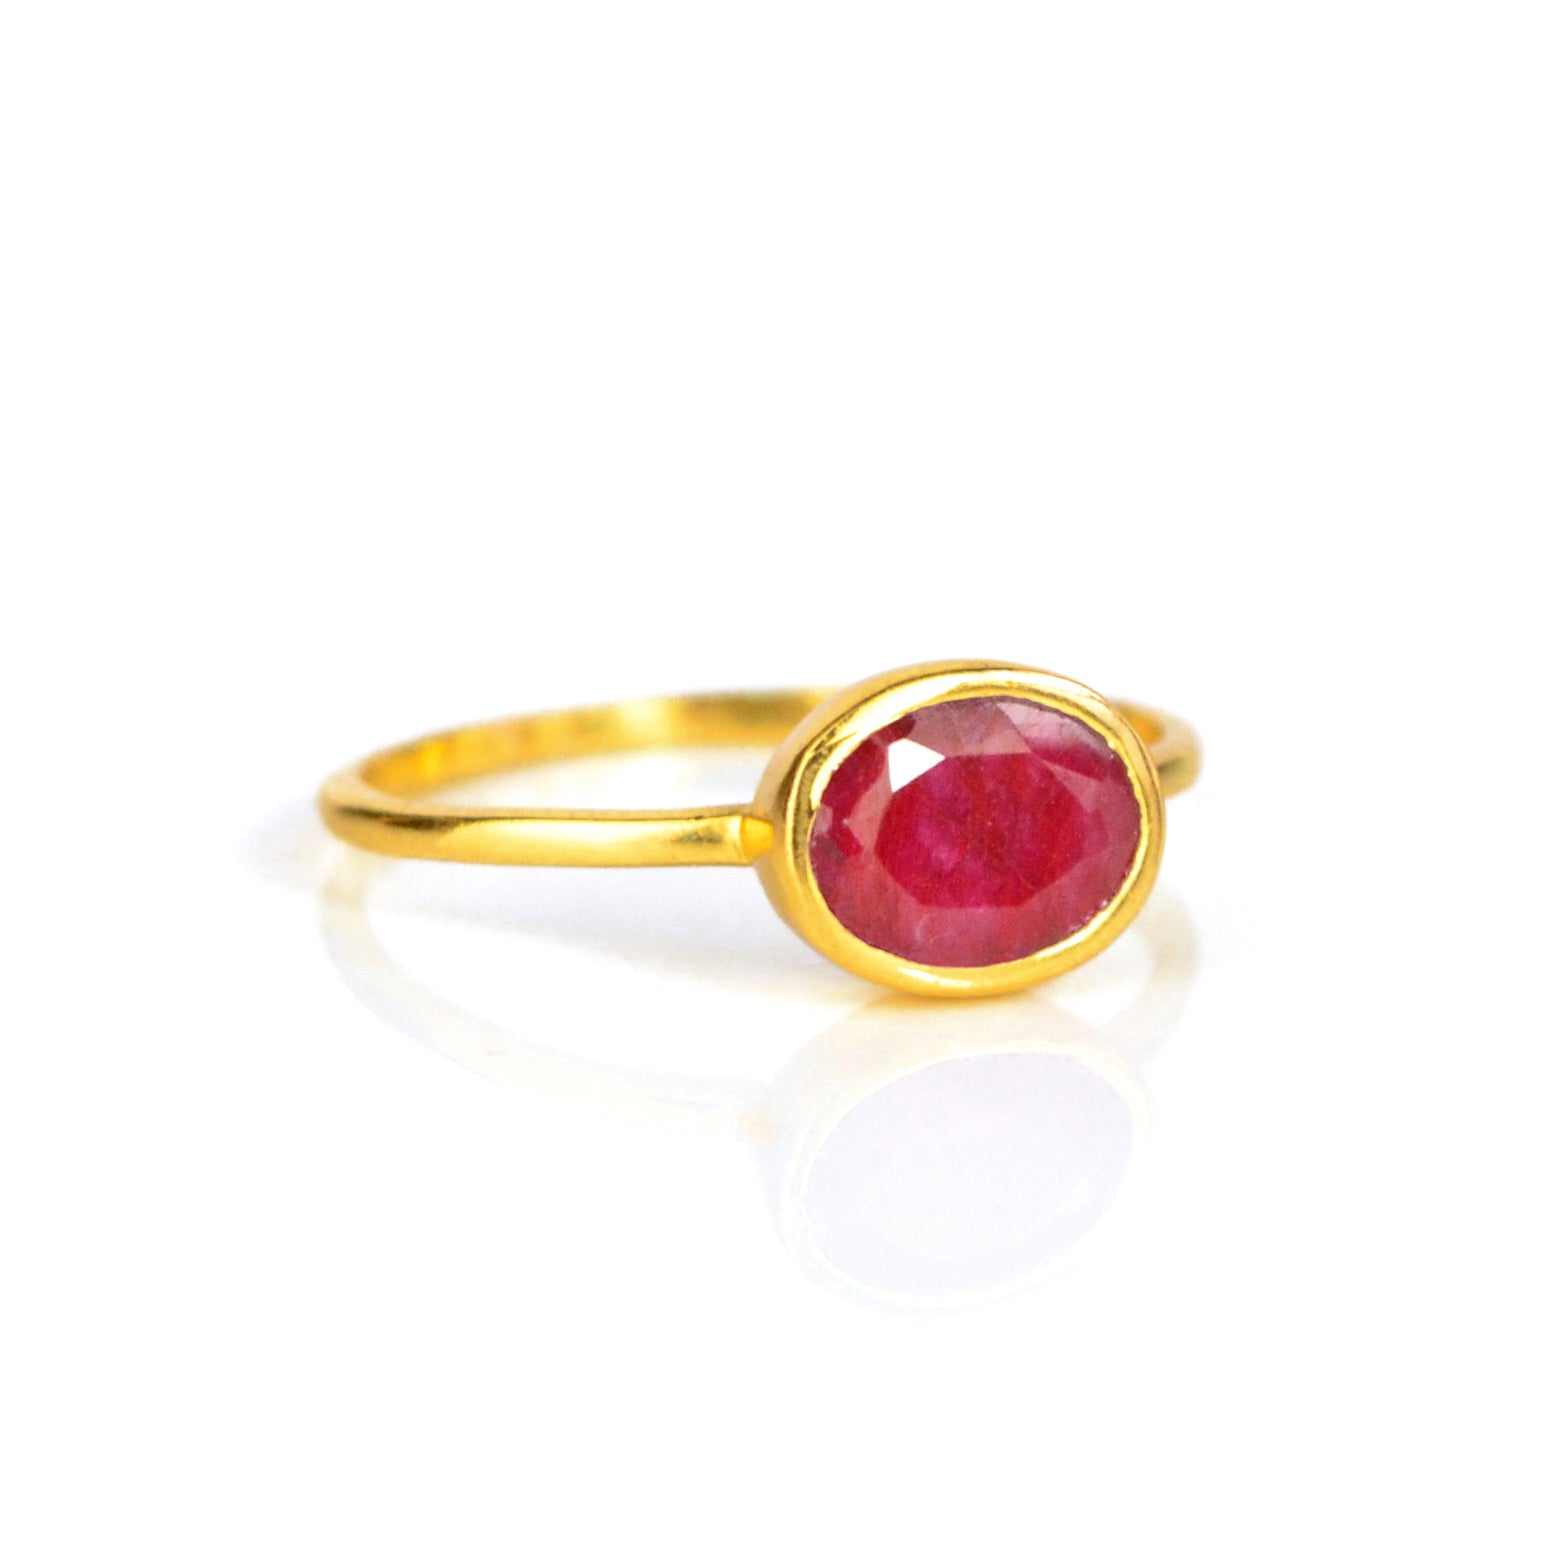 Buy Stunning 1.55ct Ruby and Diamonds 0.19ctw, Ruby Ring, Oval Cut Ruby,  14K Gold Ring, Diamond Ring, Solitaire Ring Online in India - Etsy